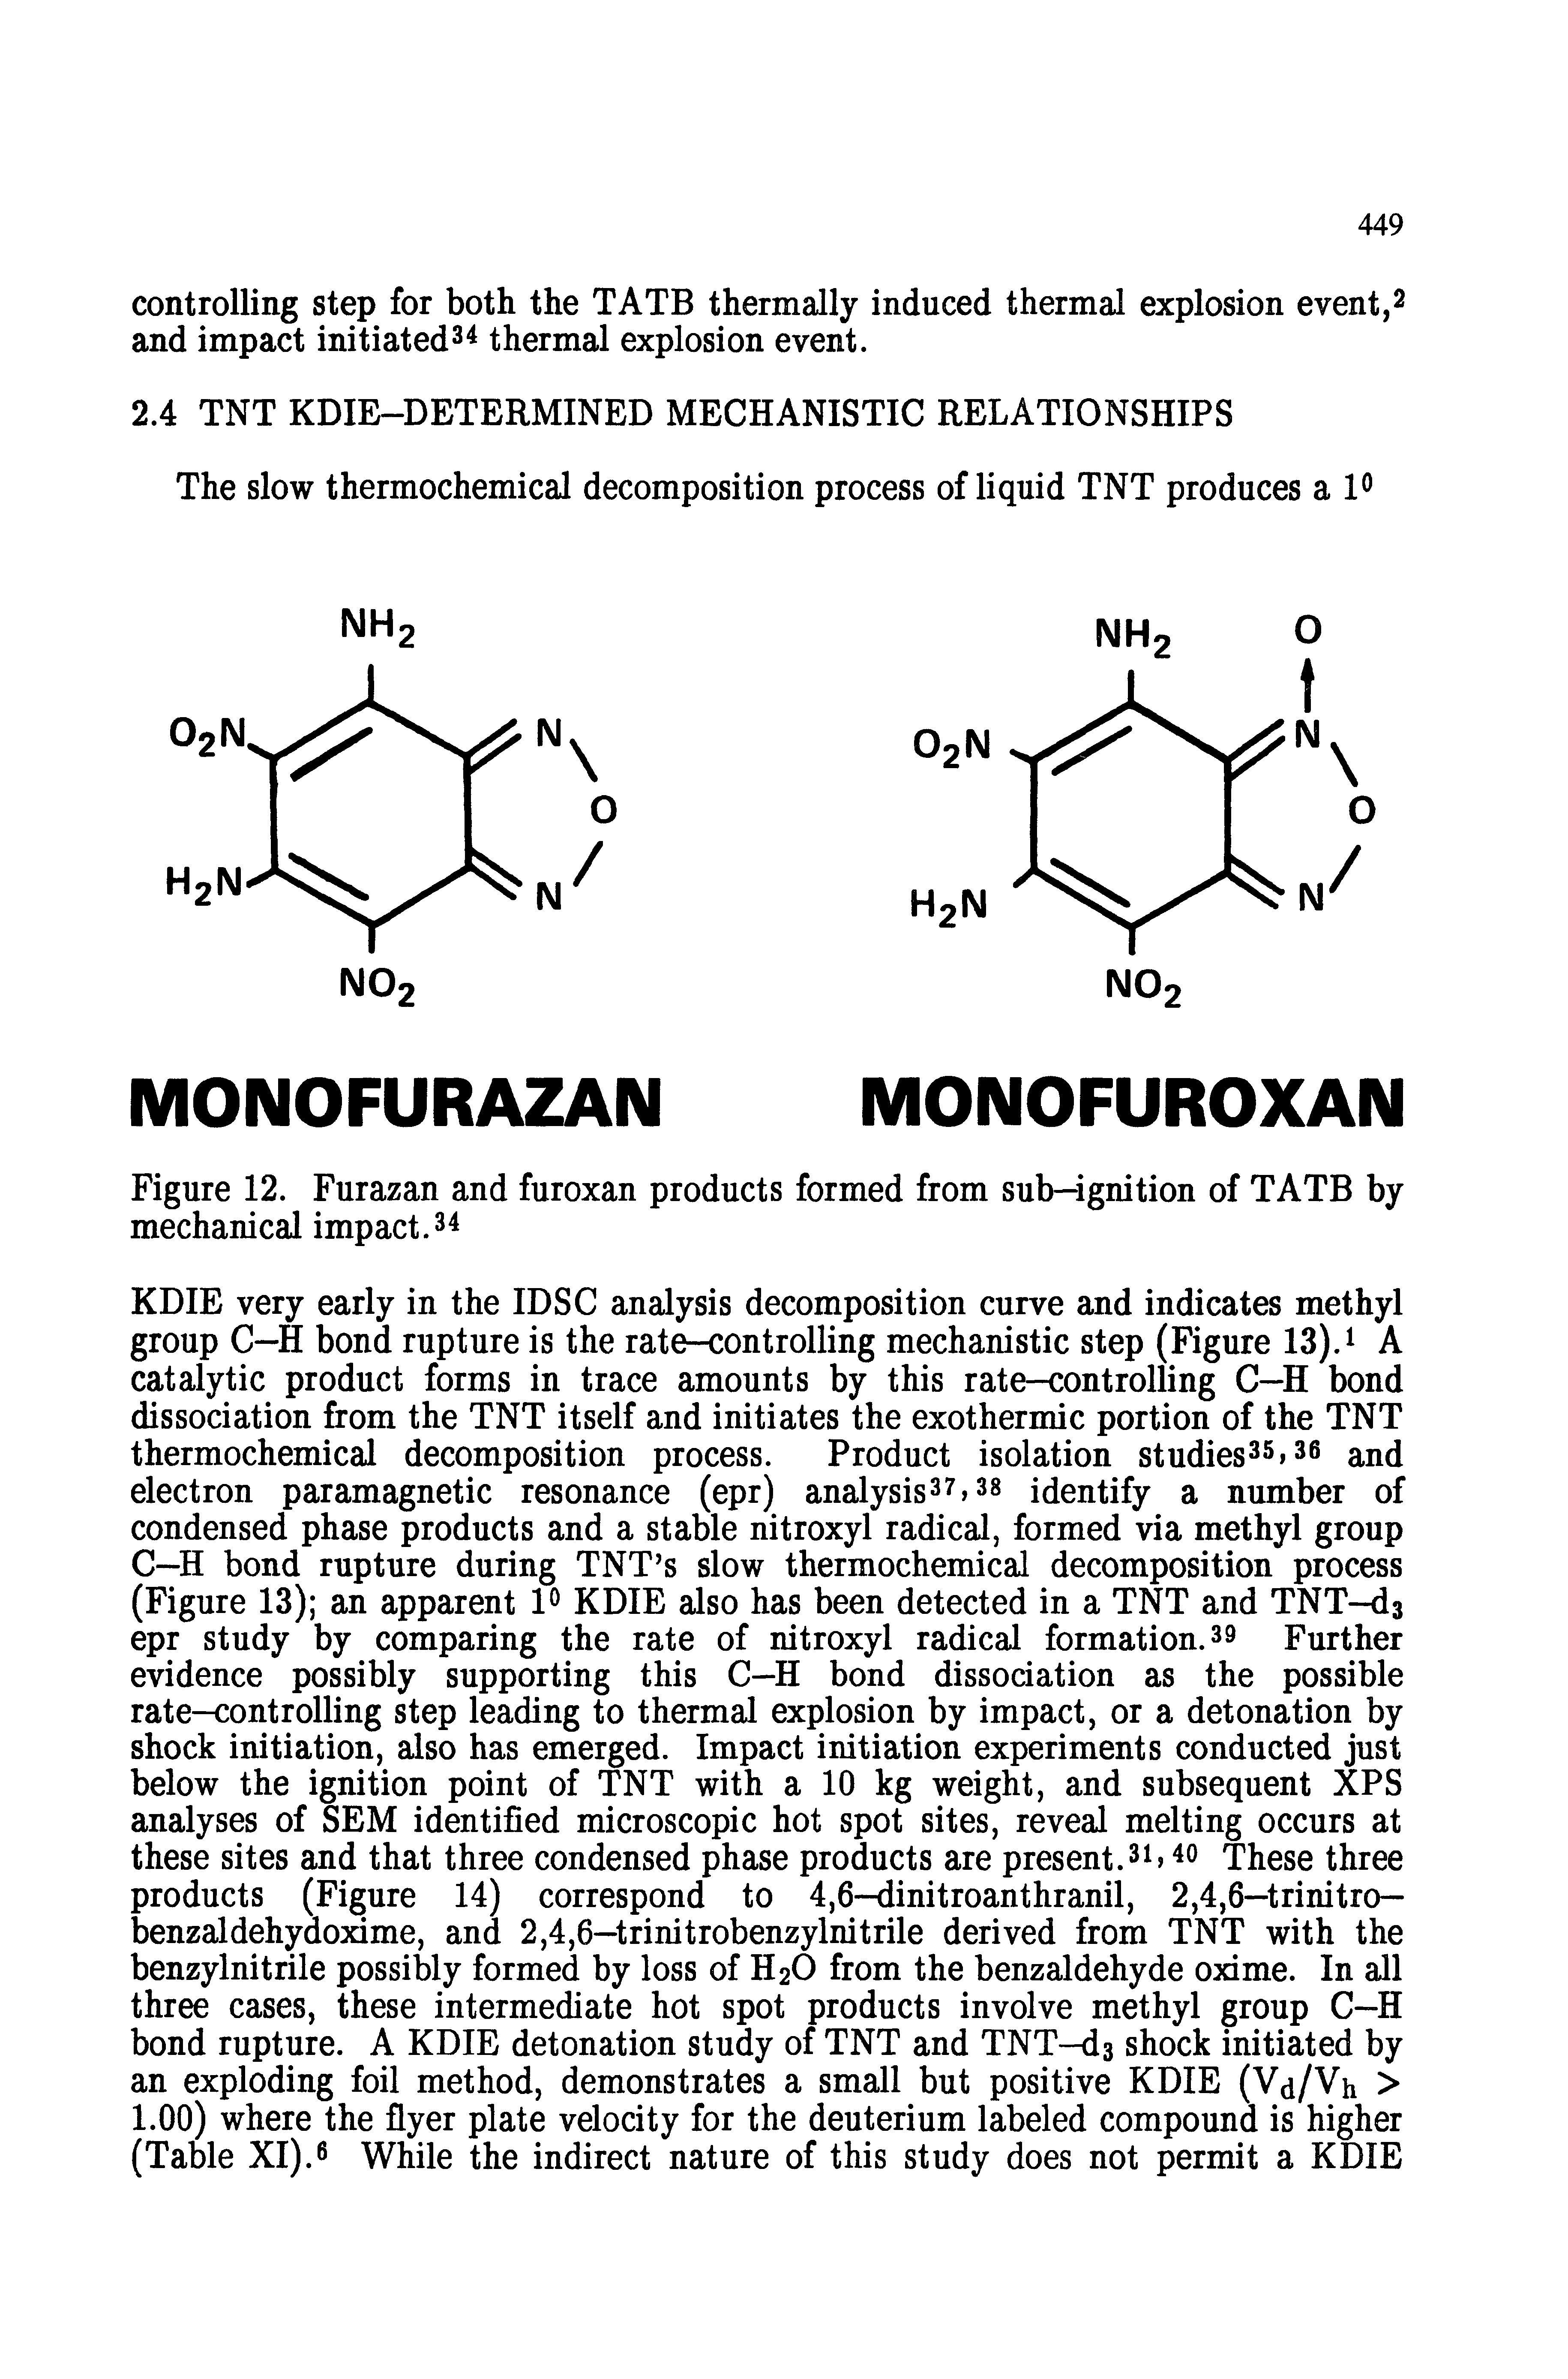 Figure 12. Furazan and furoxan products formed from sub-ignition of TATB by mechanical impact. ...